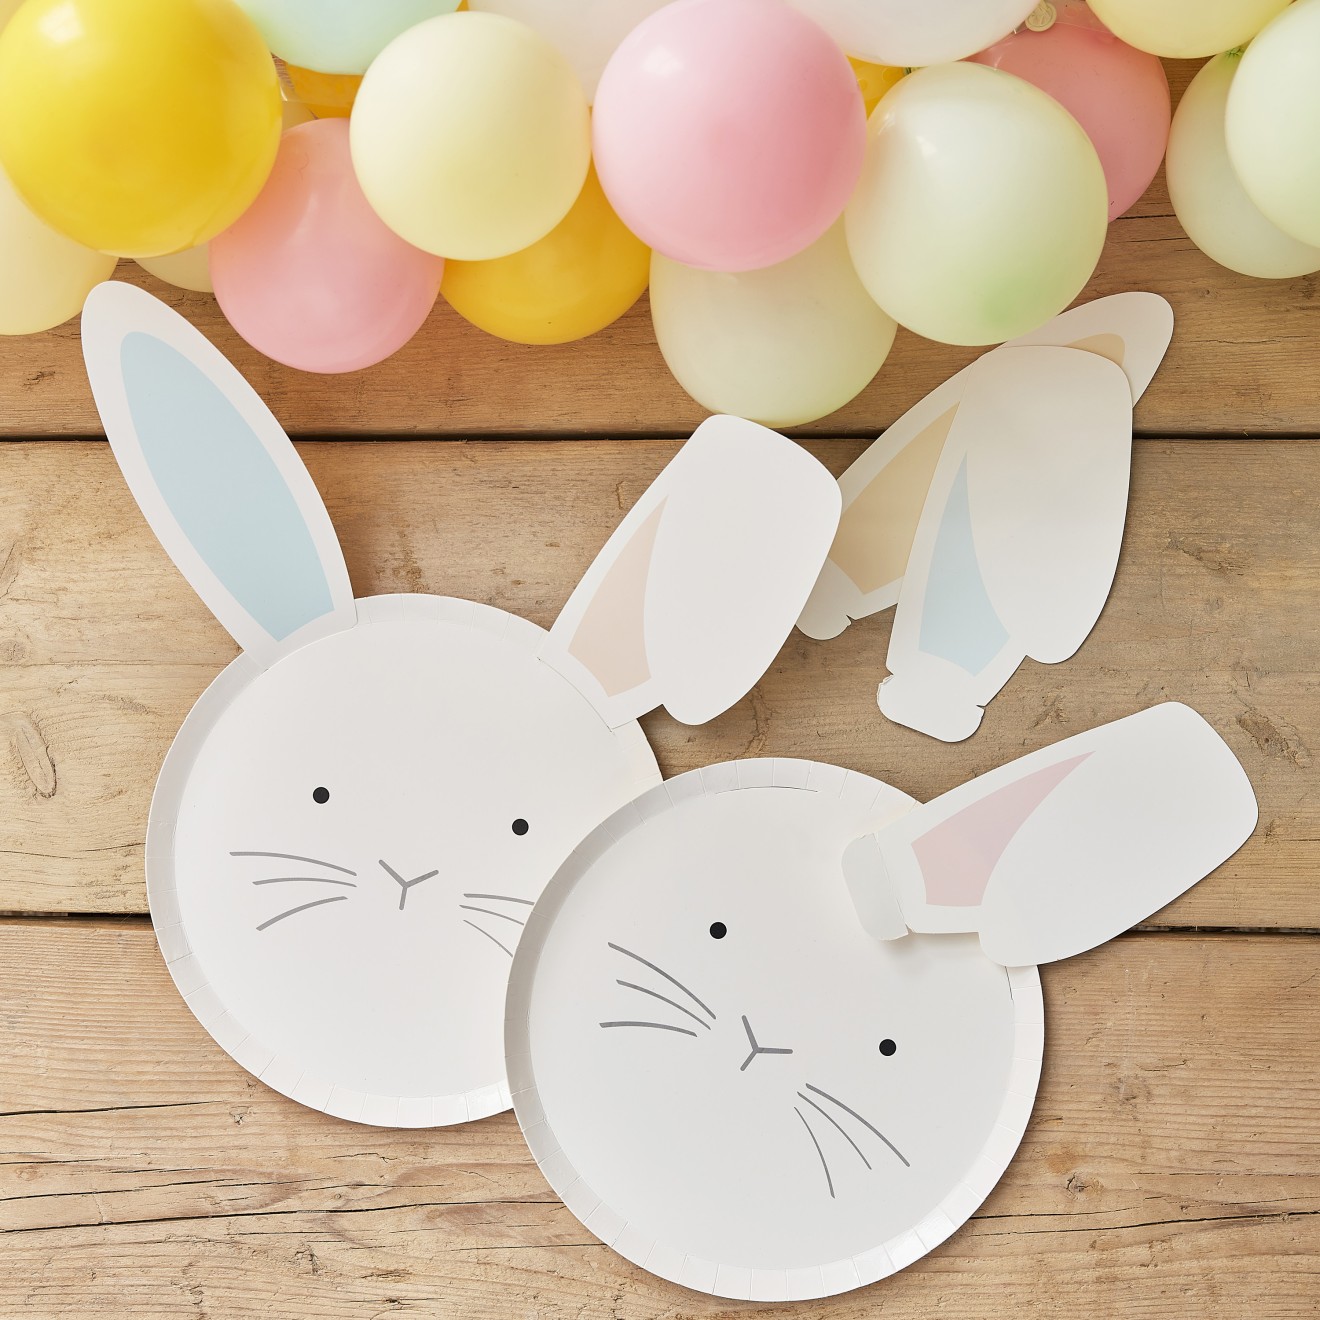 8 Plate - Bunny Face with Interchangeable Ears - Fully Eco